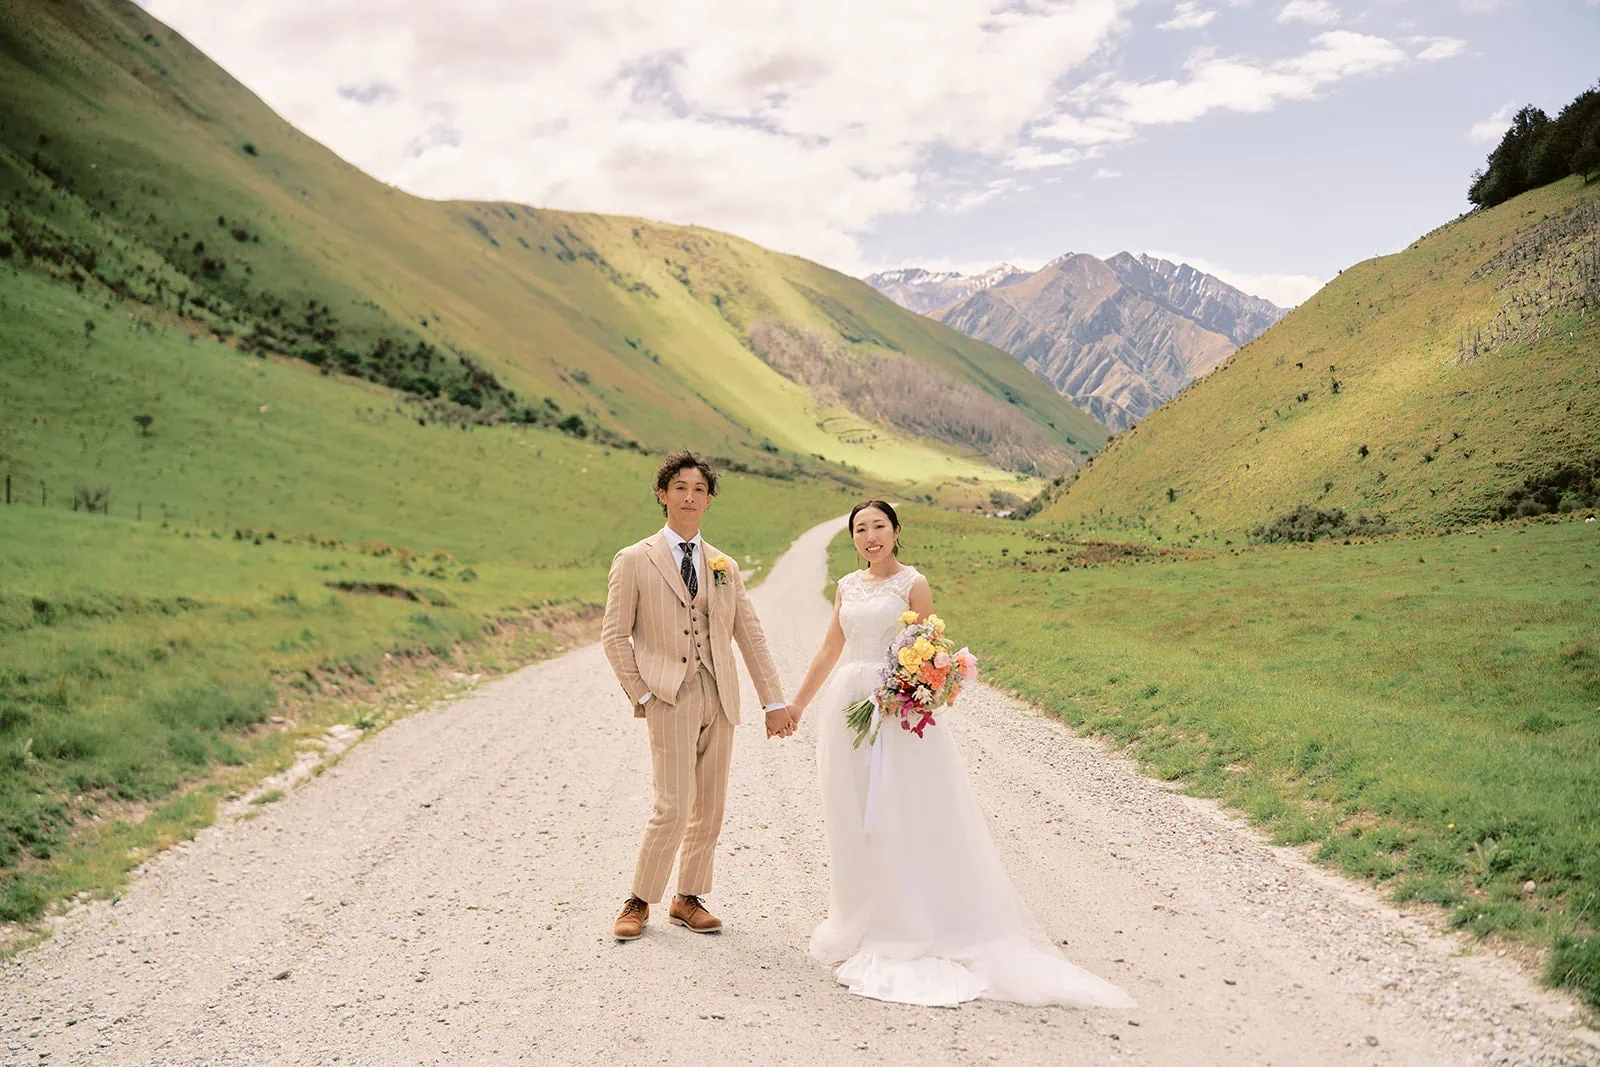 Queenstown Elopement Heli Wedding Photographer クイーンズタウン結婚式 | A bride and groom standing on a dirt road in Queenstown, surrounded by majestic mountains.